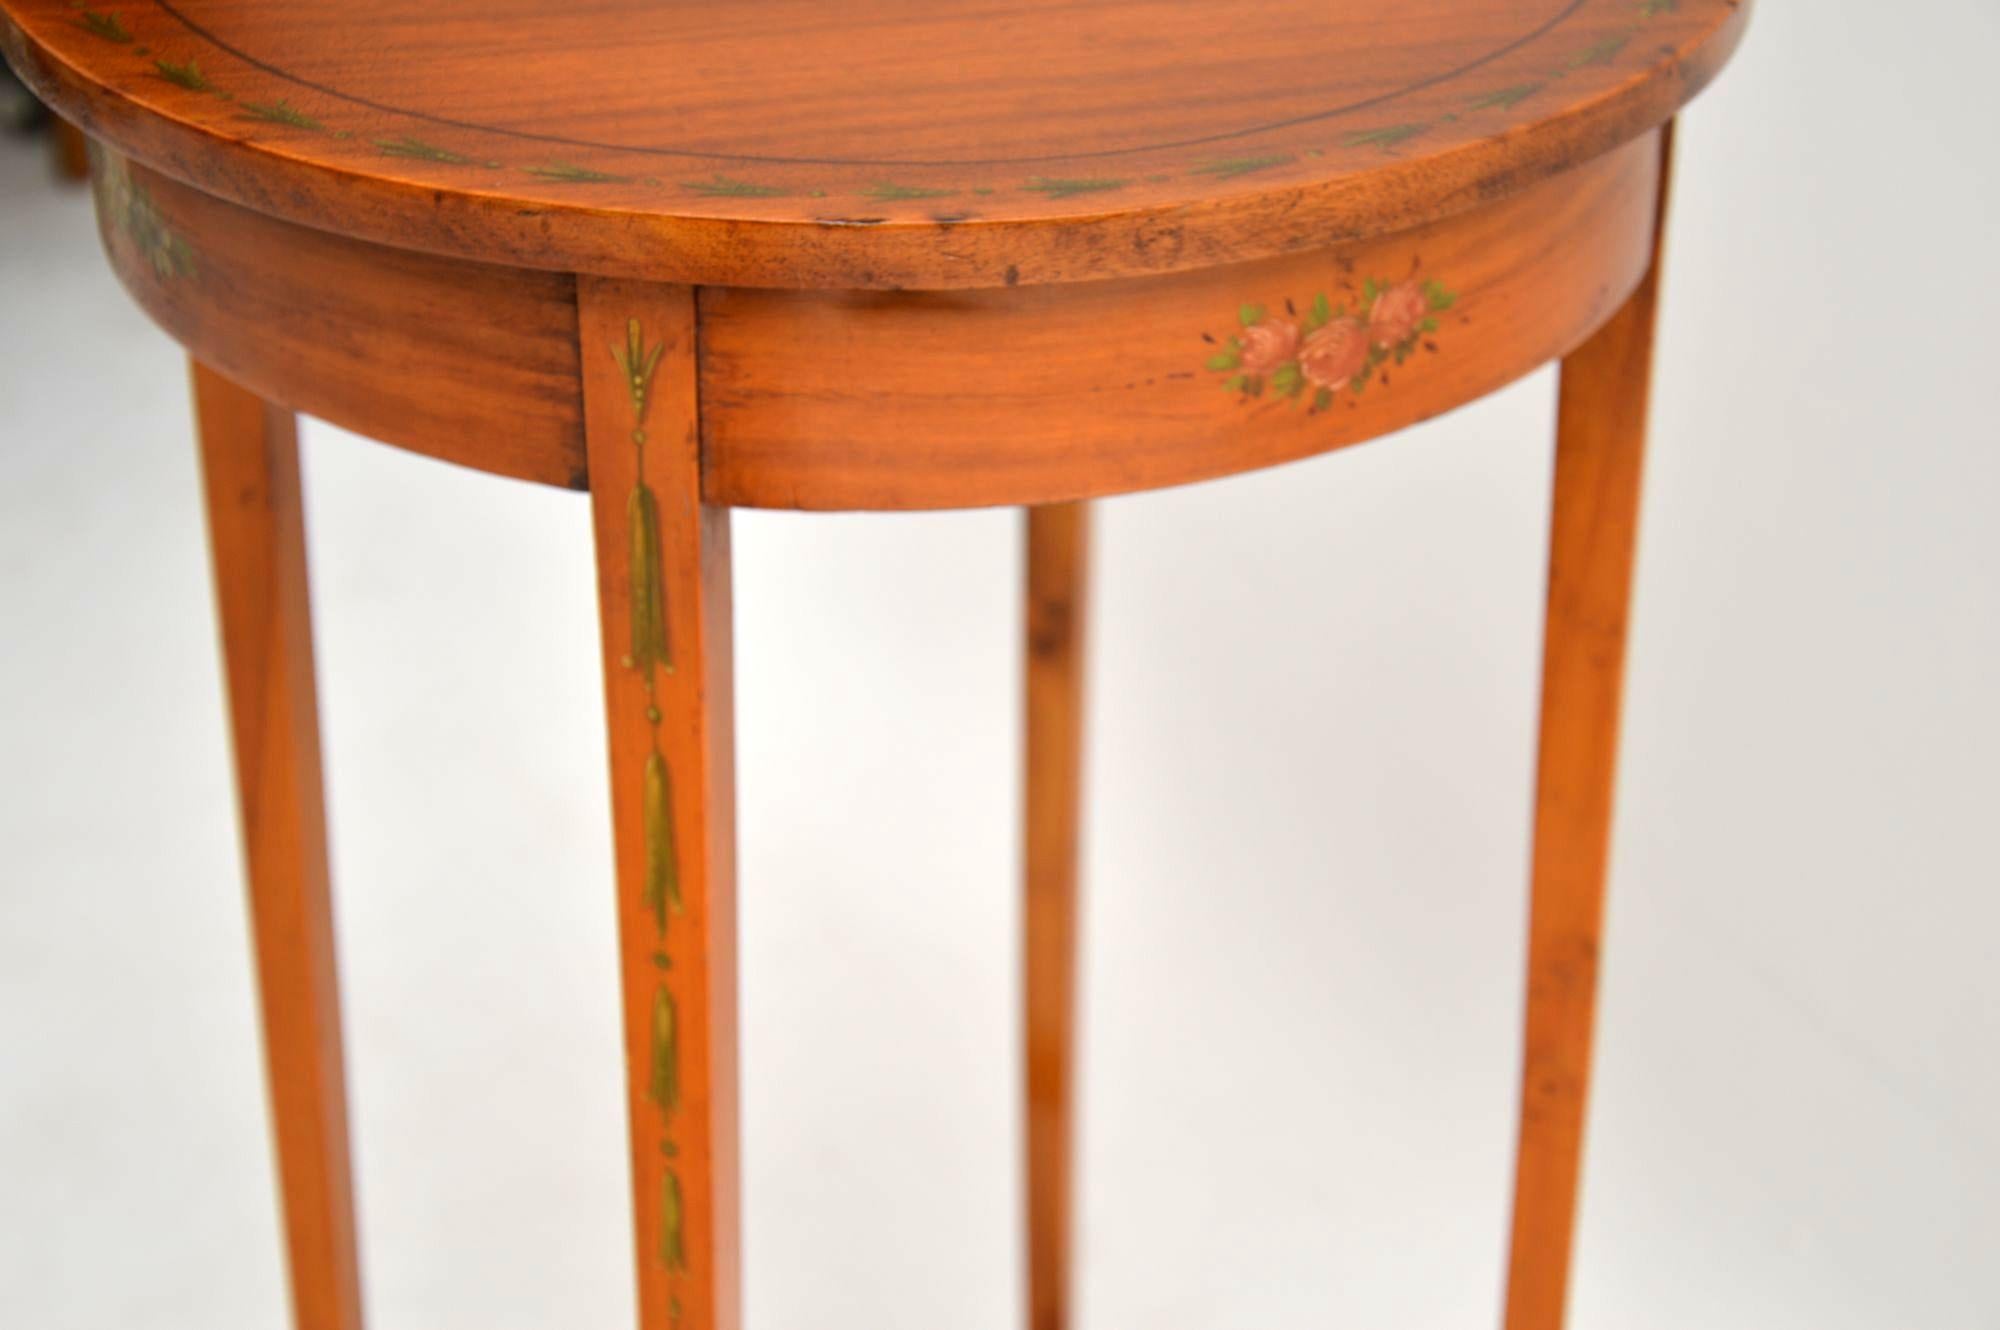 Antique Edwardian Painted Satin Wood Side Table 1